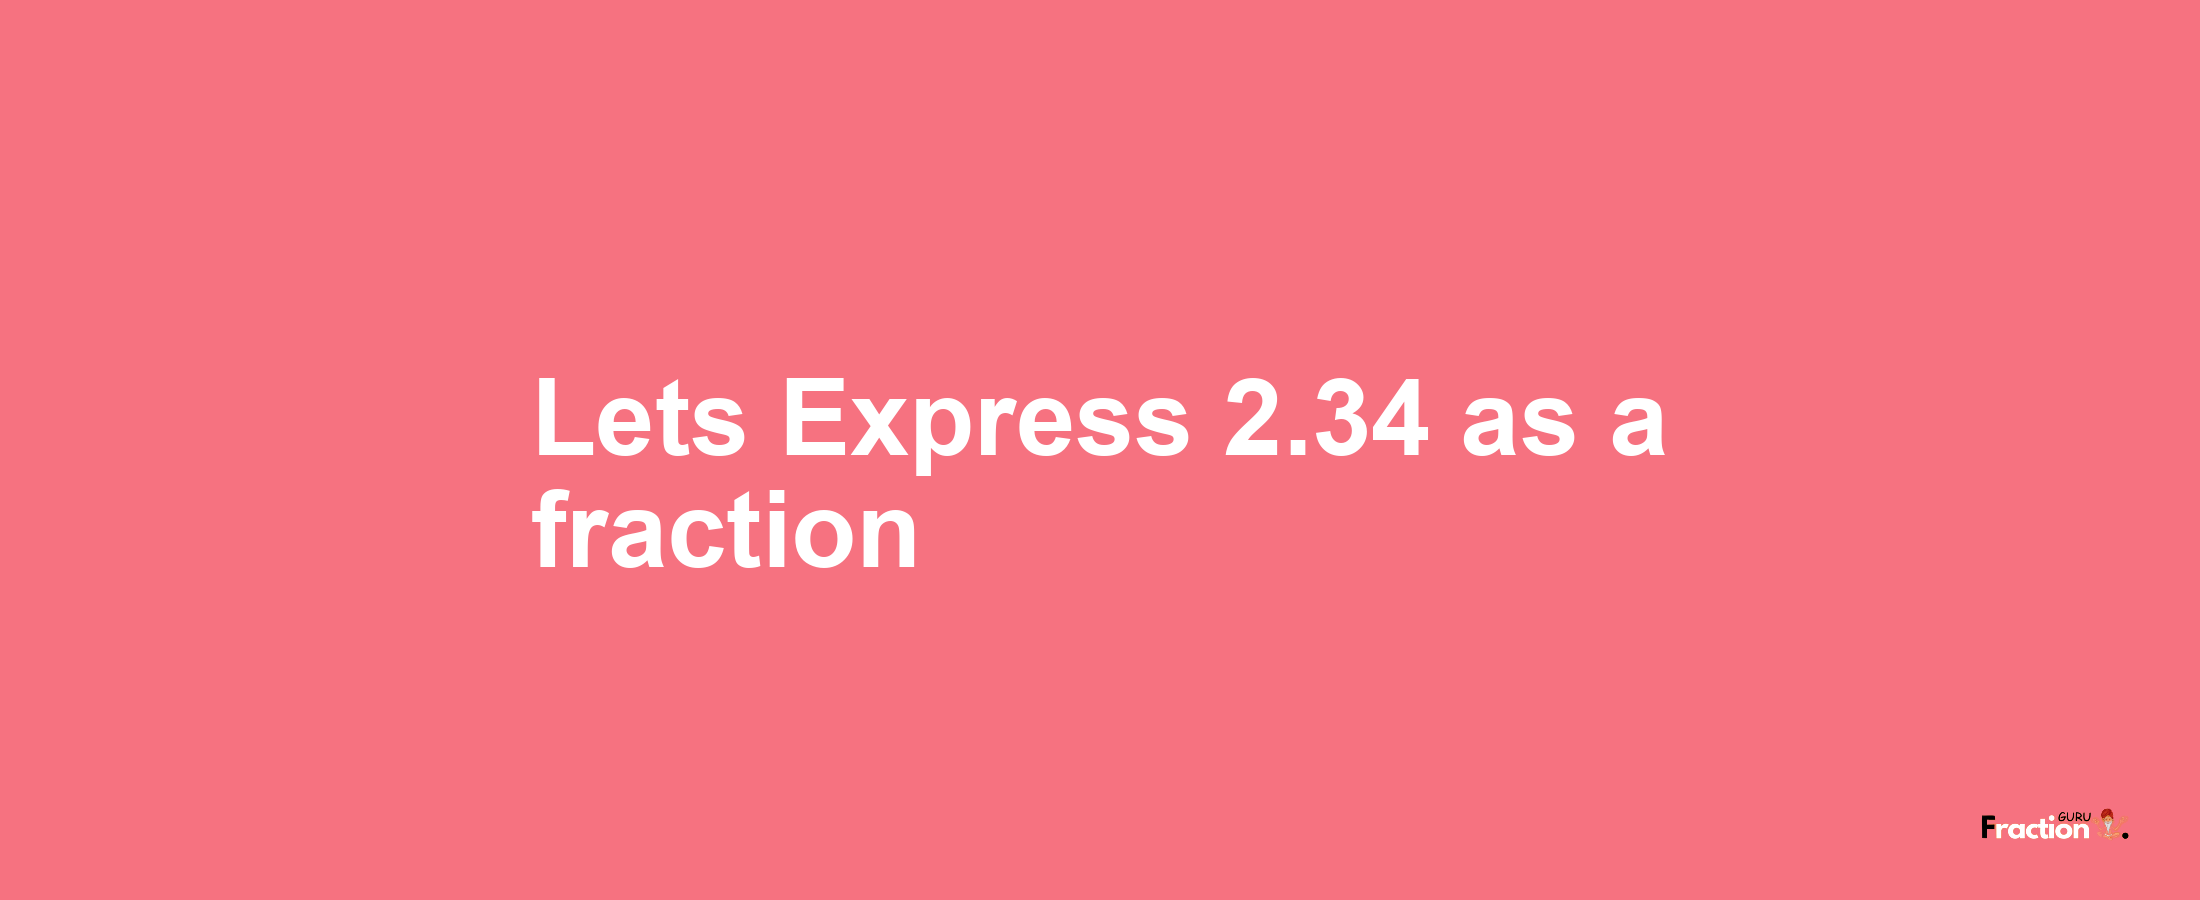 Lets Express 2.34 as afraction